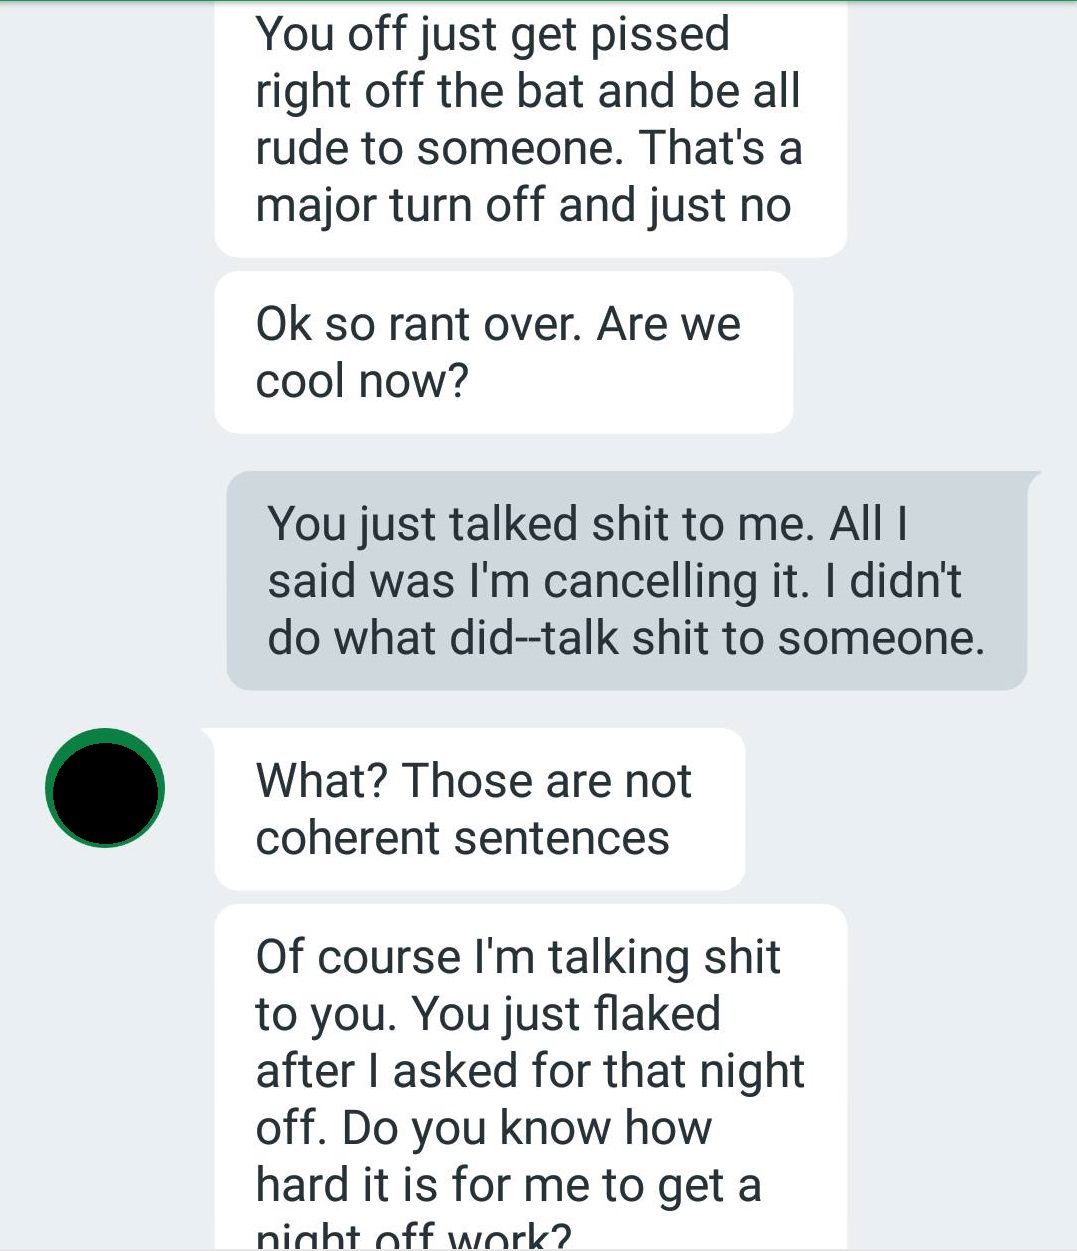 girlfriend gets porno texts from co-worker Sex Images Hq